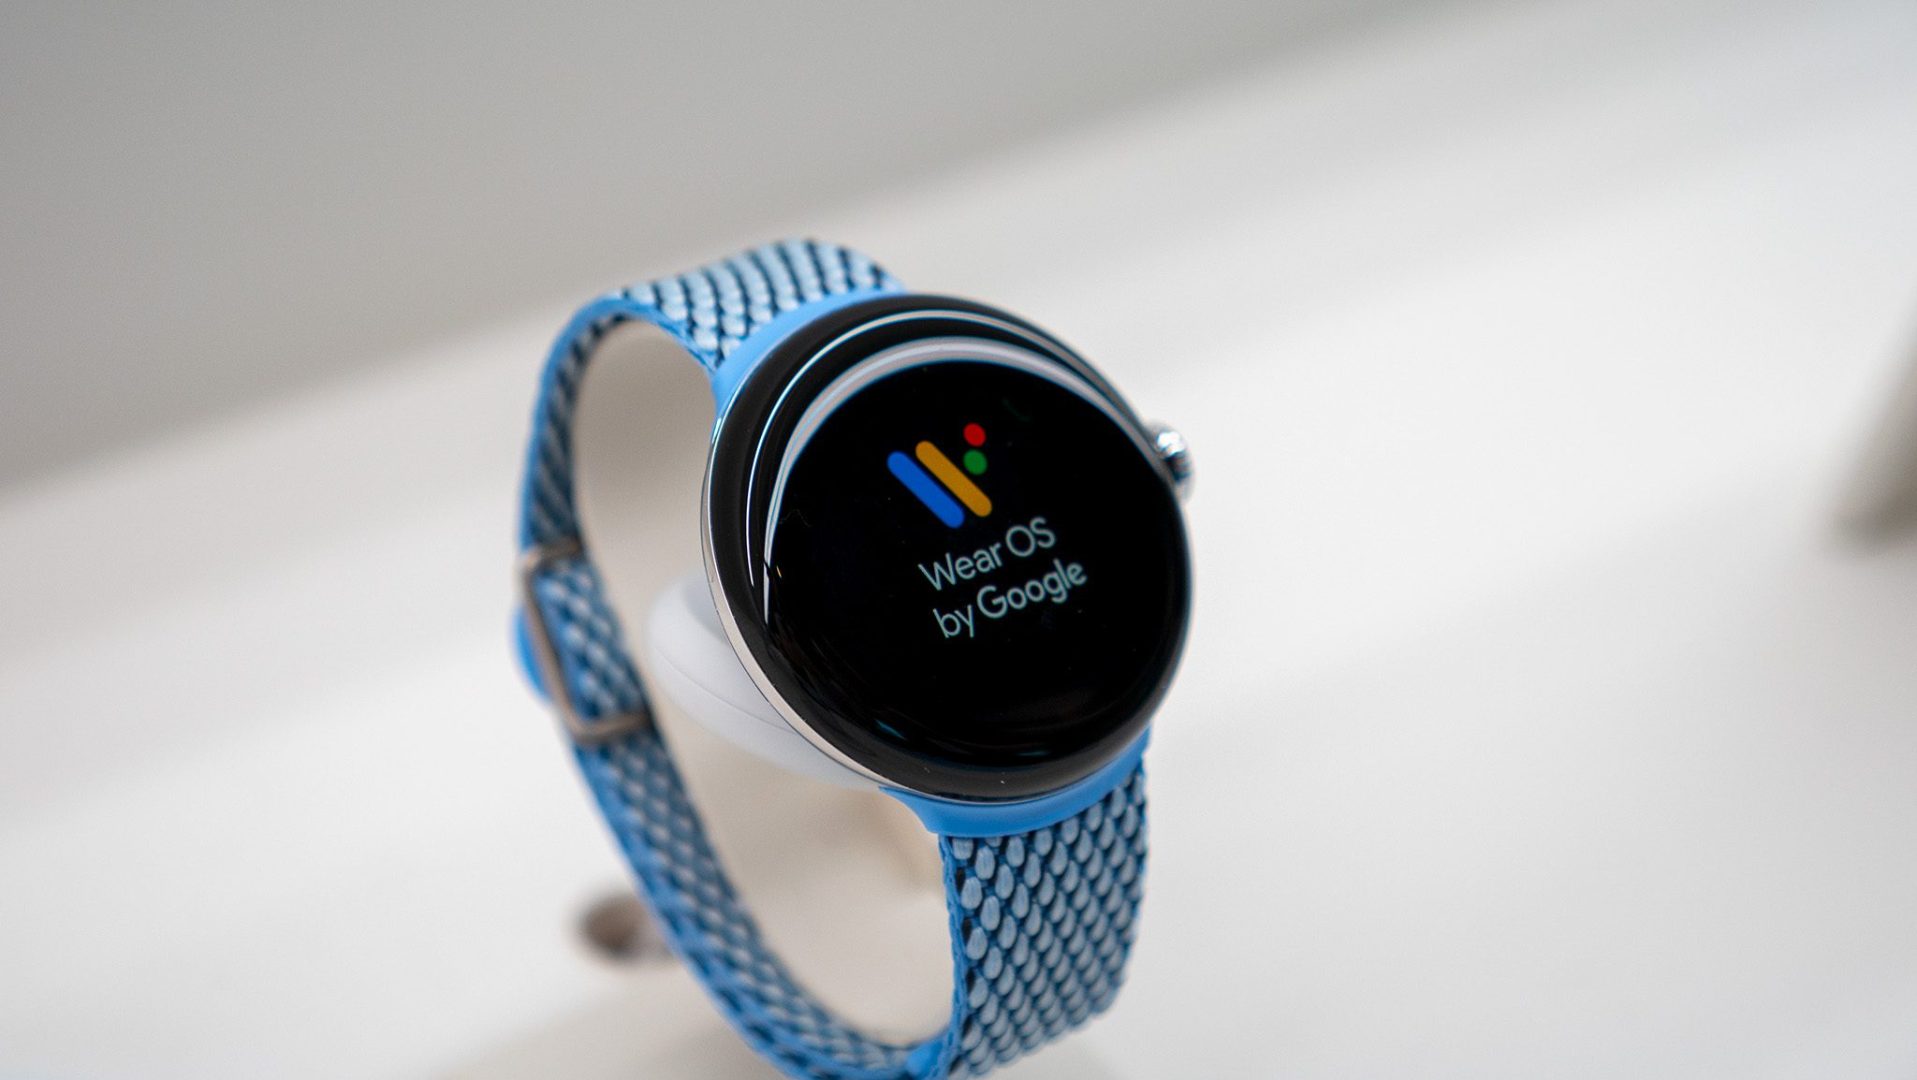 More Wear OS watch faces will consume less power in the future